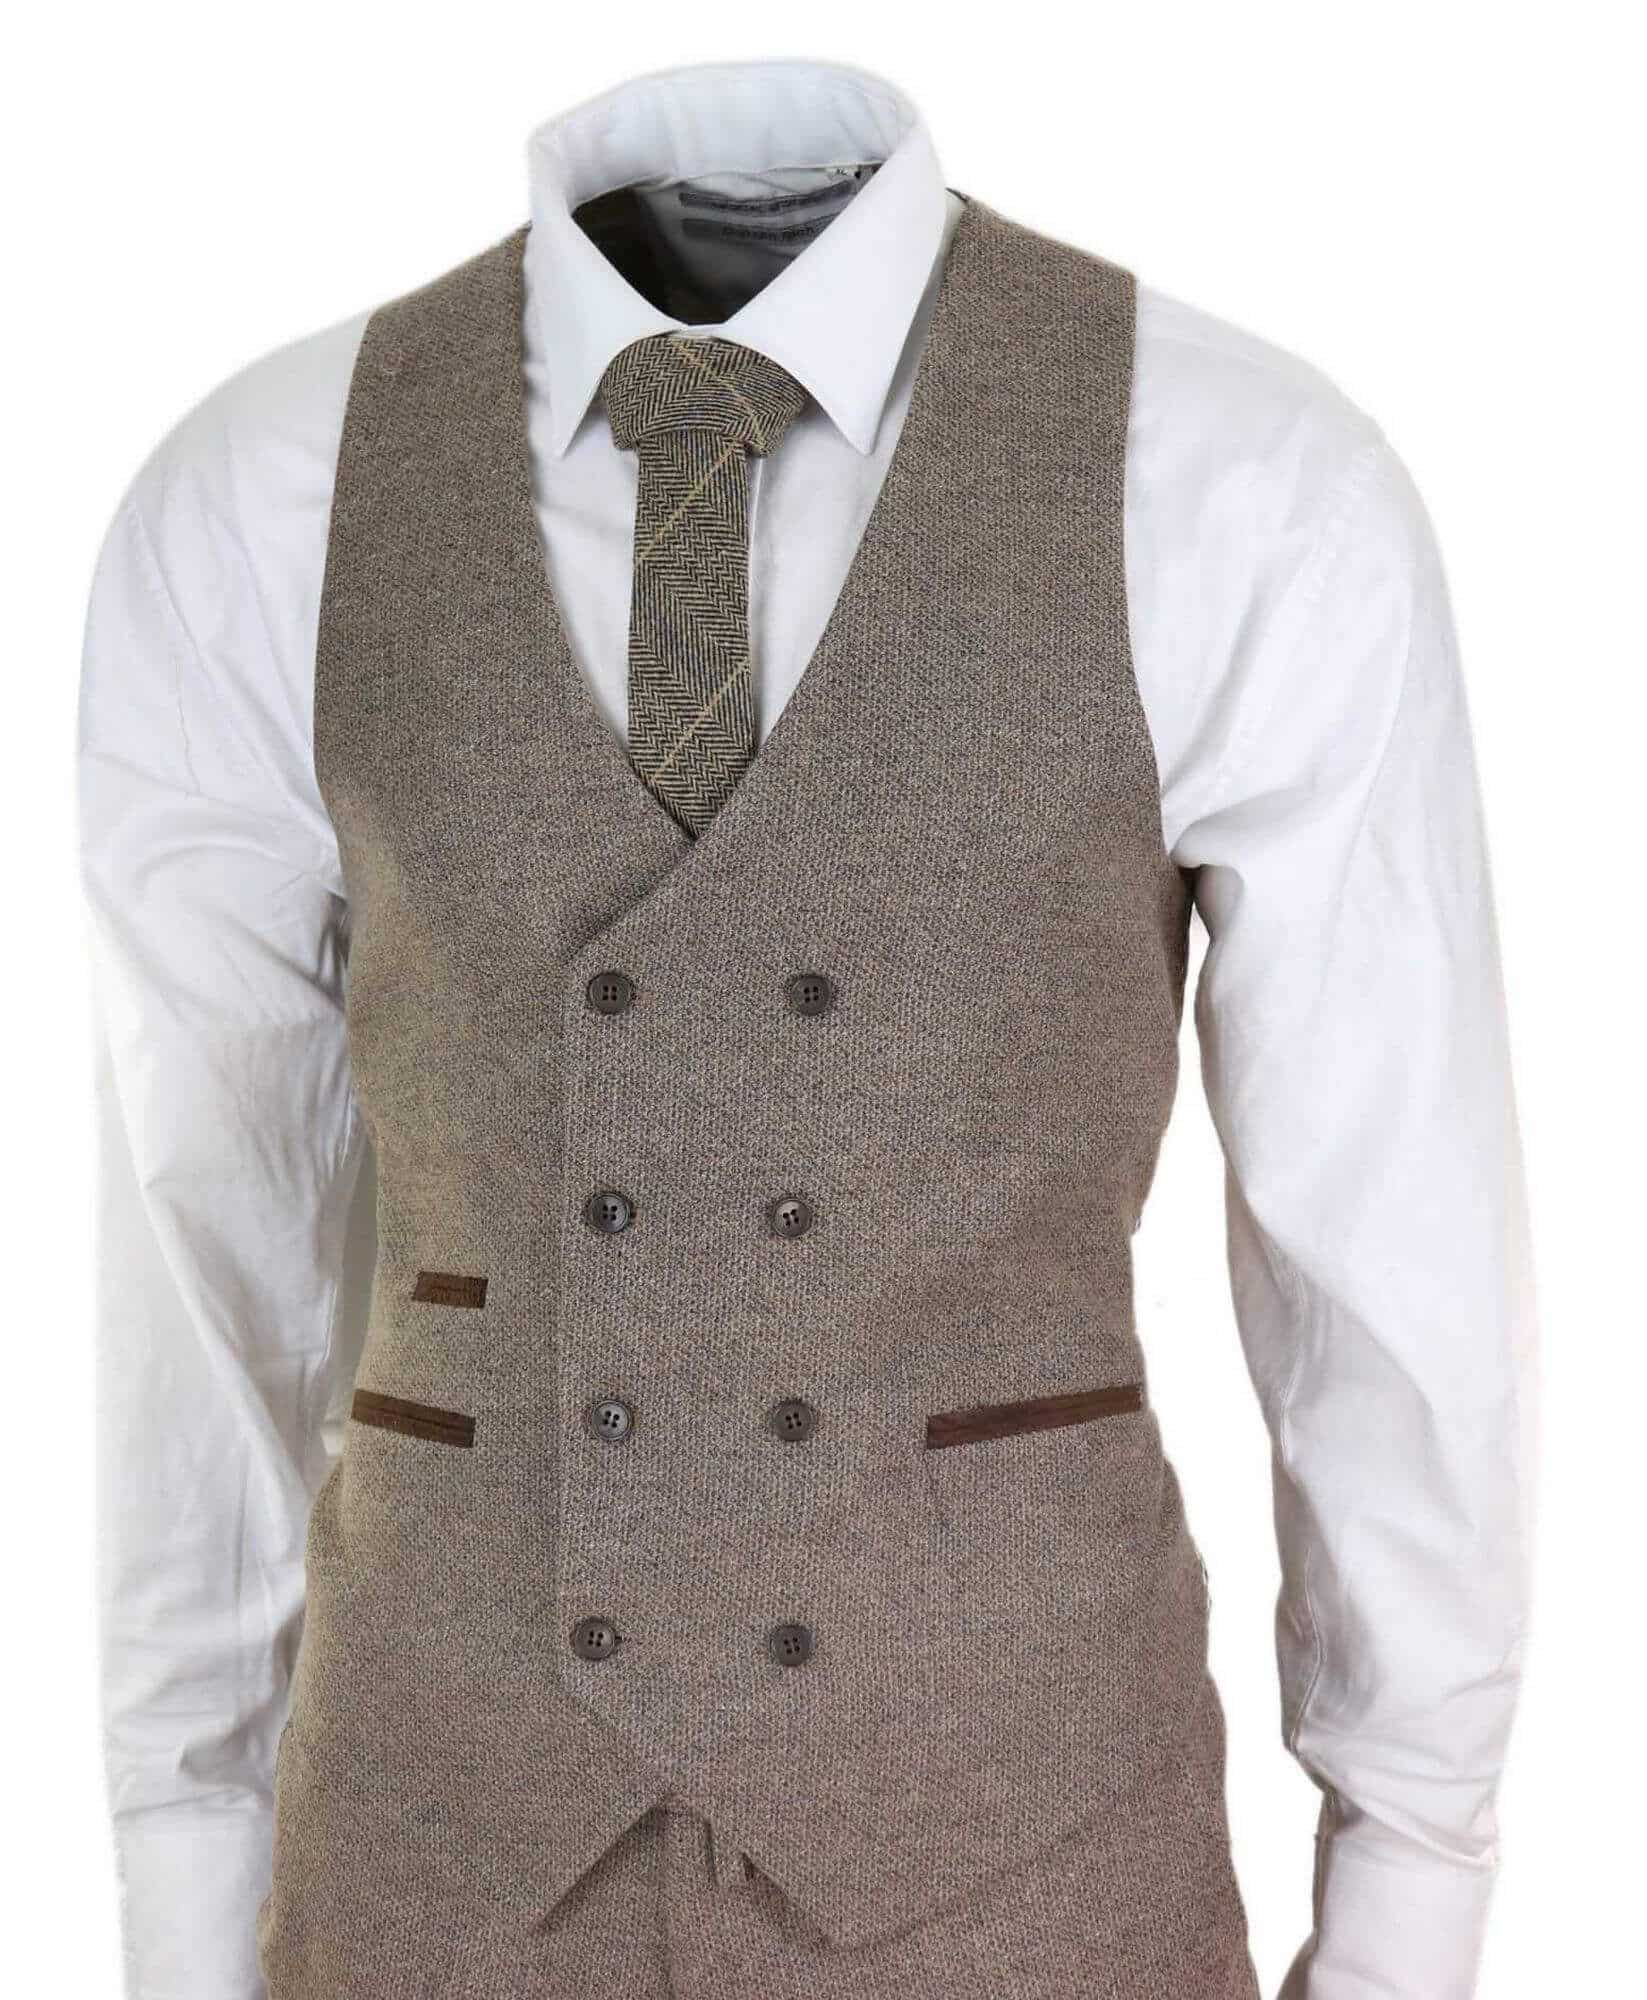 Mens Double Breasted Waistcoat - www.inf-inet.com